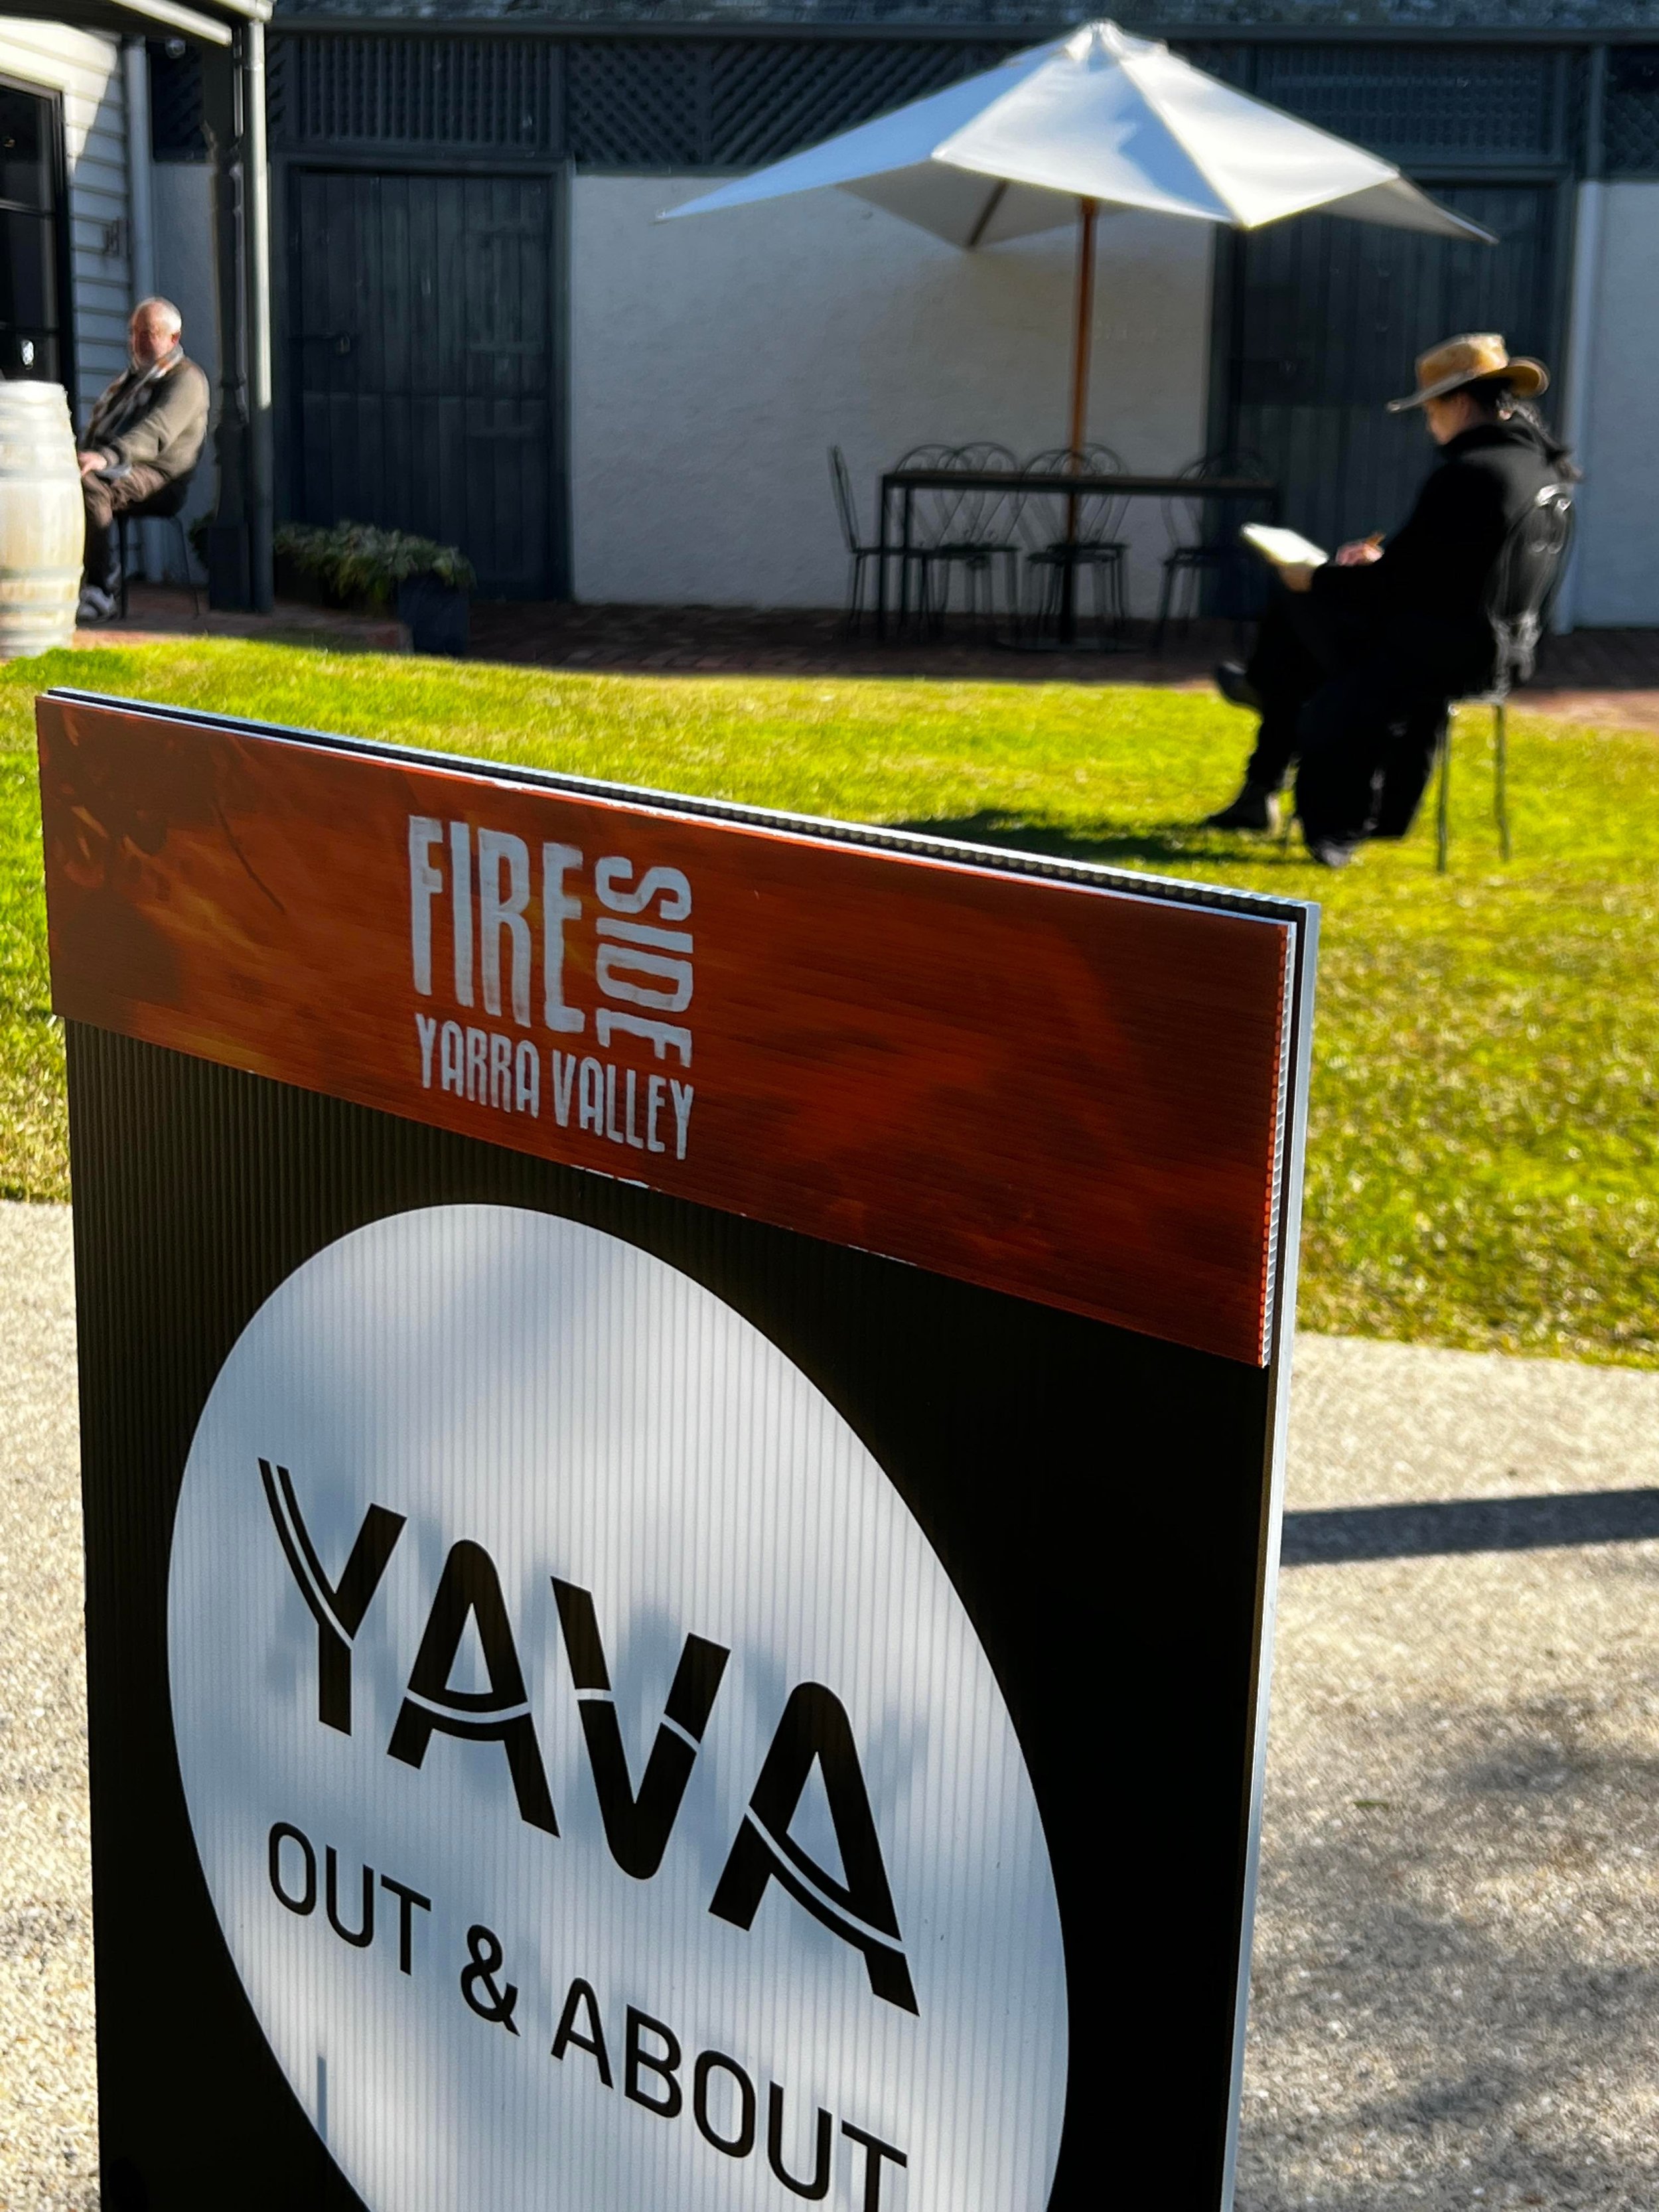 YAVA Out &amp; About FIRESIDE at Coombe Yarra Valley